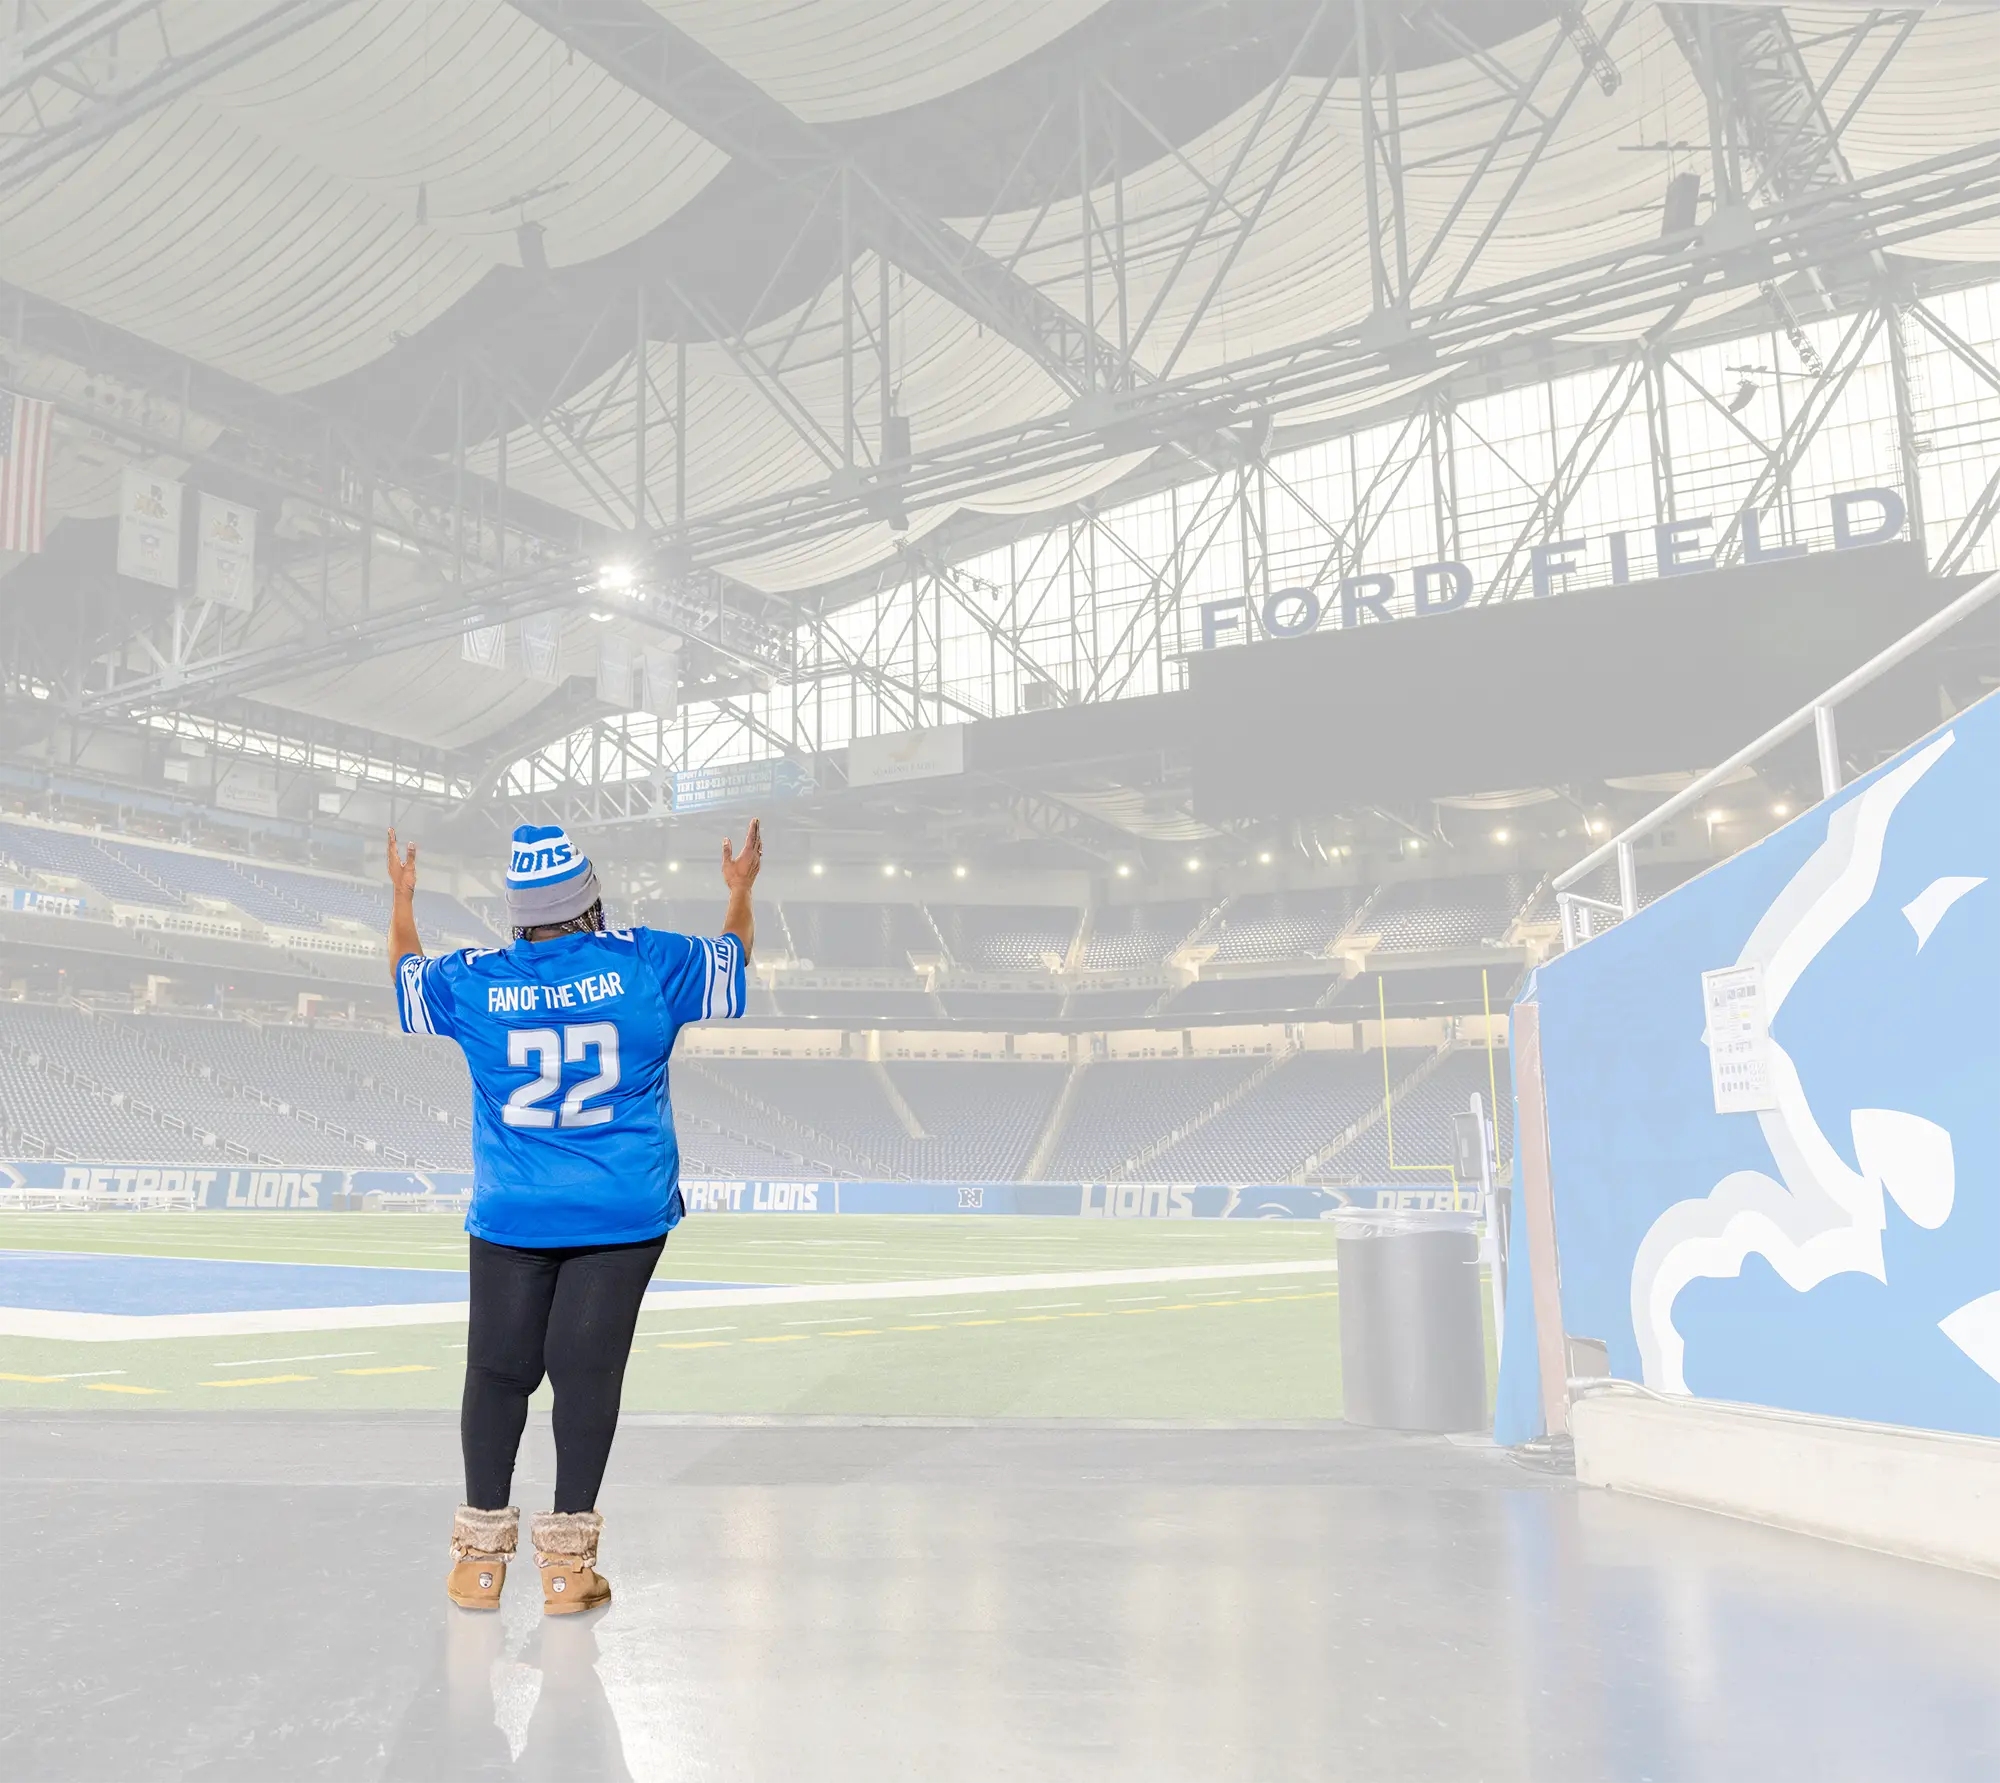 Denise Ford in her #22 Fan of the Year Lions jersey standing at the stadium team tunnel exit looking out at Ford Field